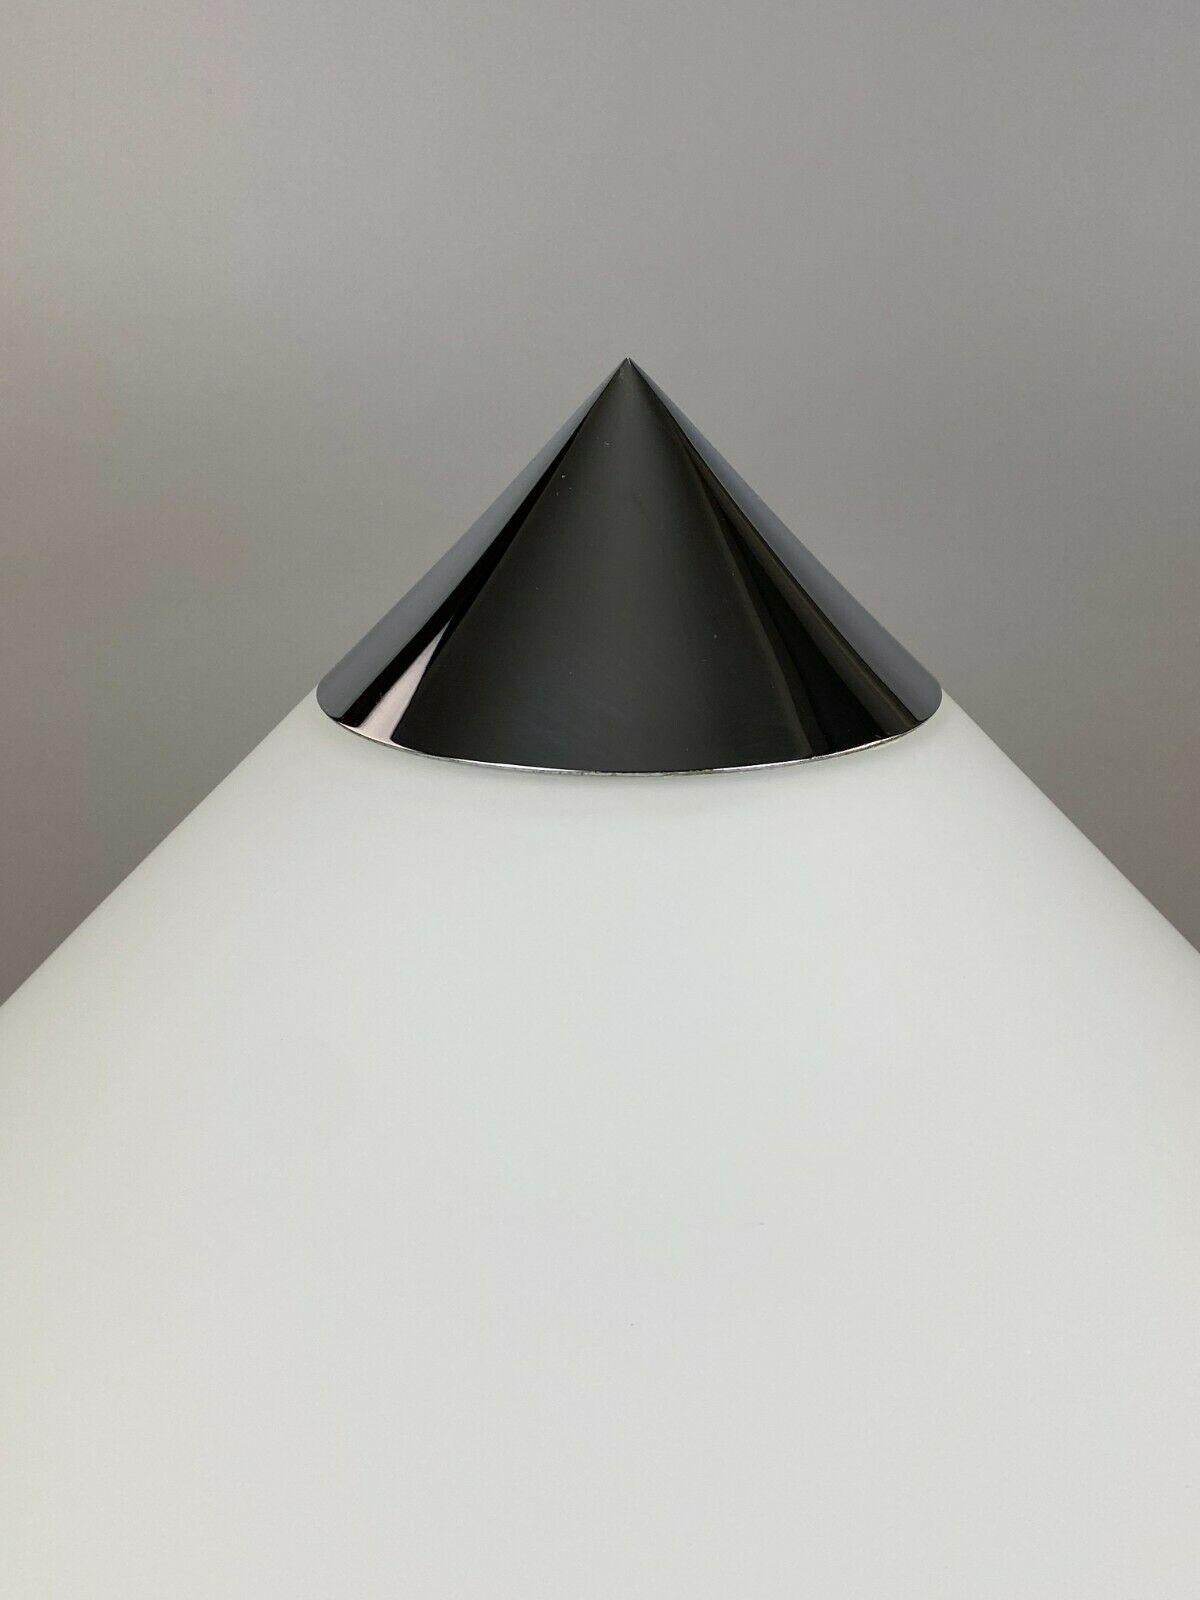 60s 70s Lamp Light Wall Lamp Limburg Plafoniere Space Age Design In Good Condition For Sale In Neuenkirchen, NI